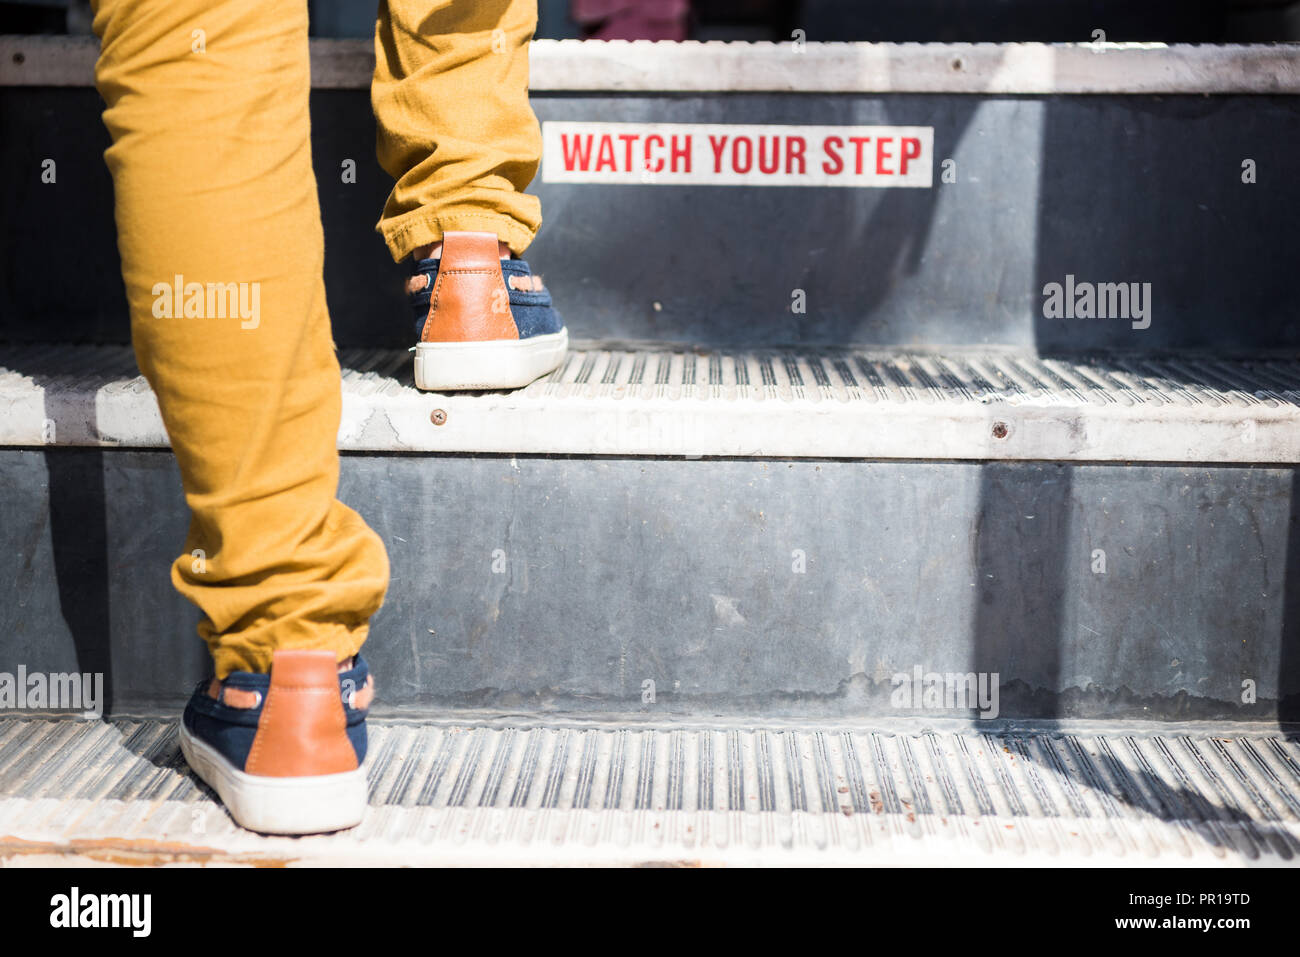 cropped shot of child going upstairs in bus with 'watch your step' sign Stock Photo